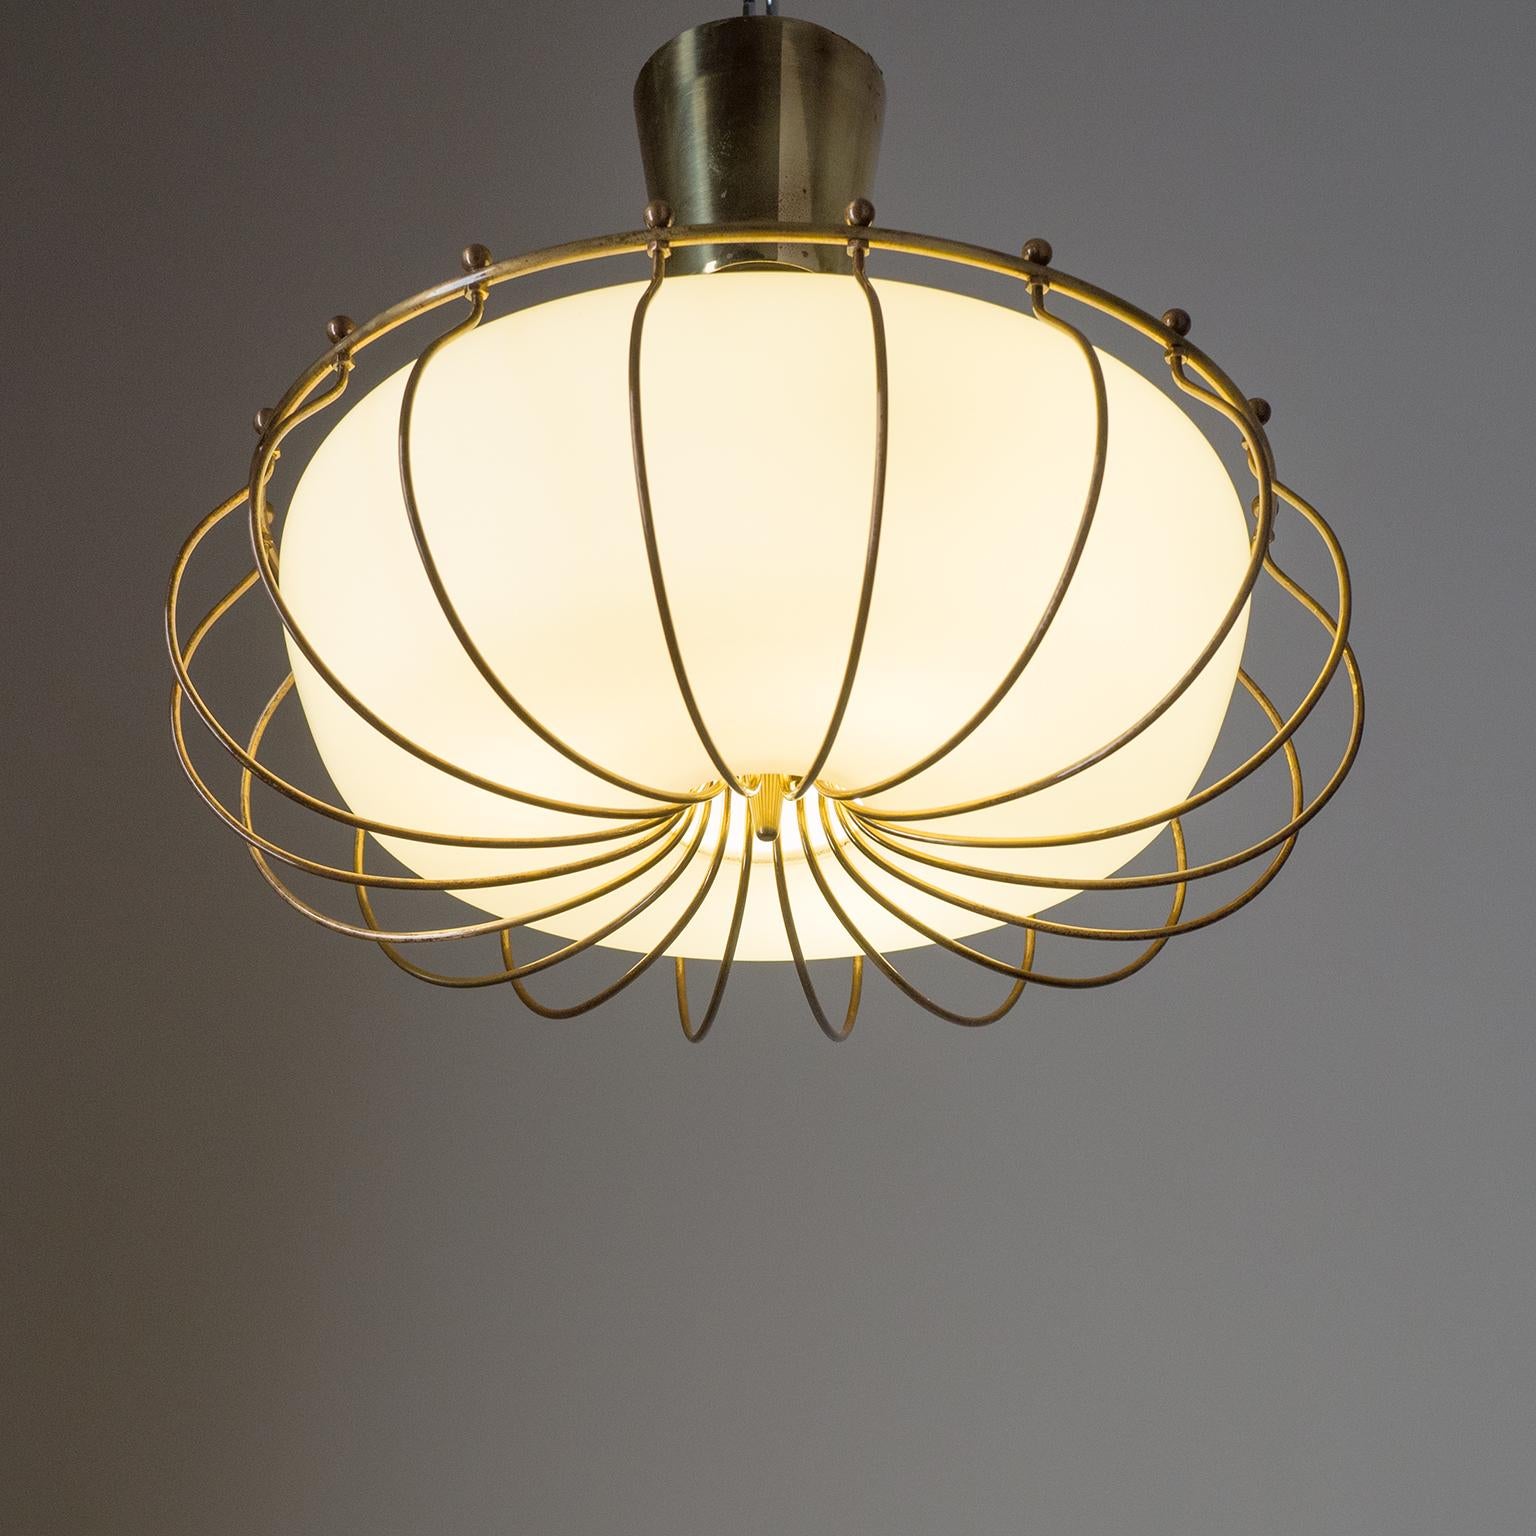 Ceiling Light, 1940s, Brass and Satin Glass 5